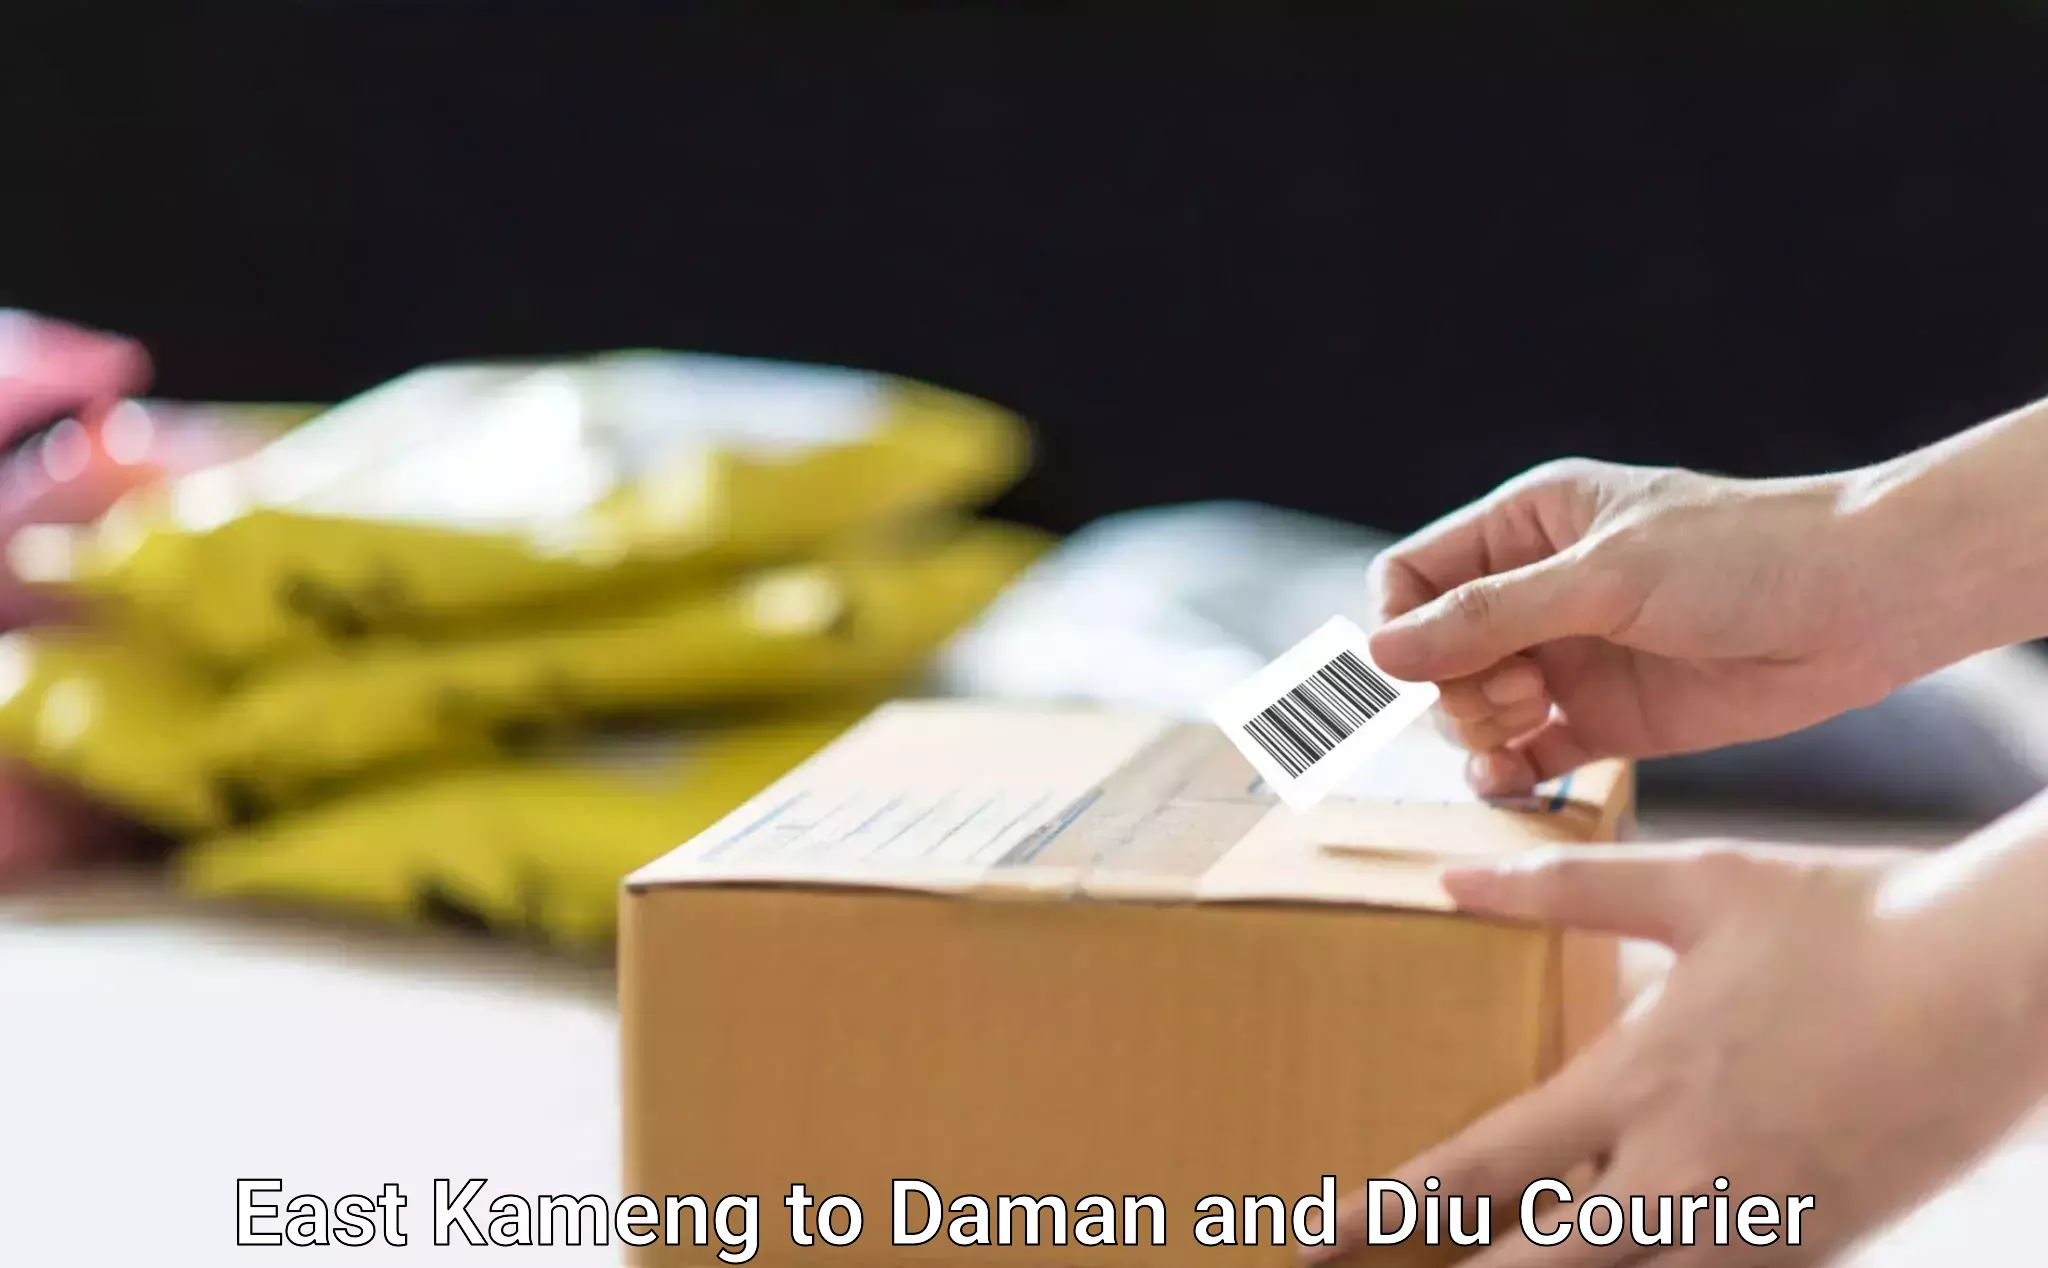 Personal courier services East Kameng to Daman and Diu